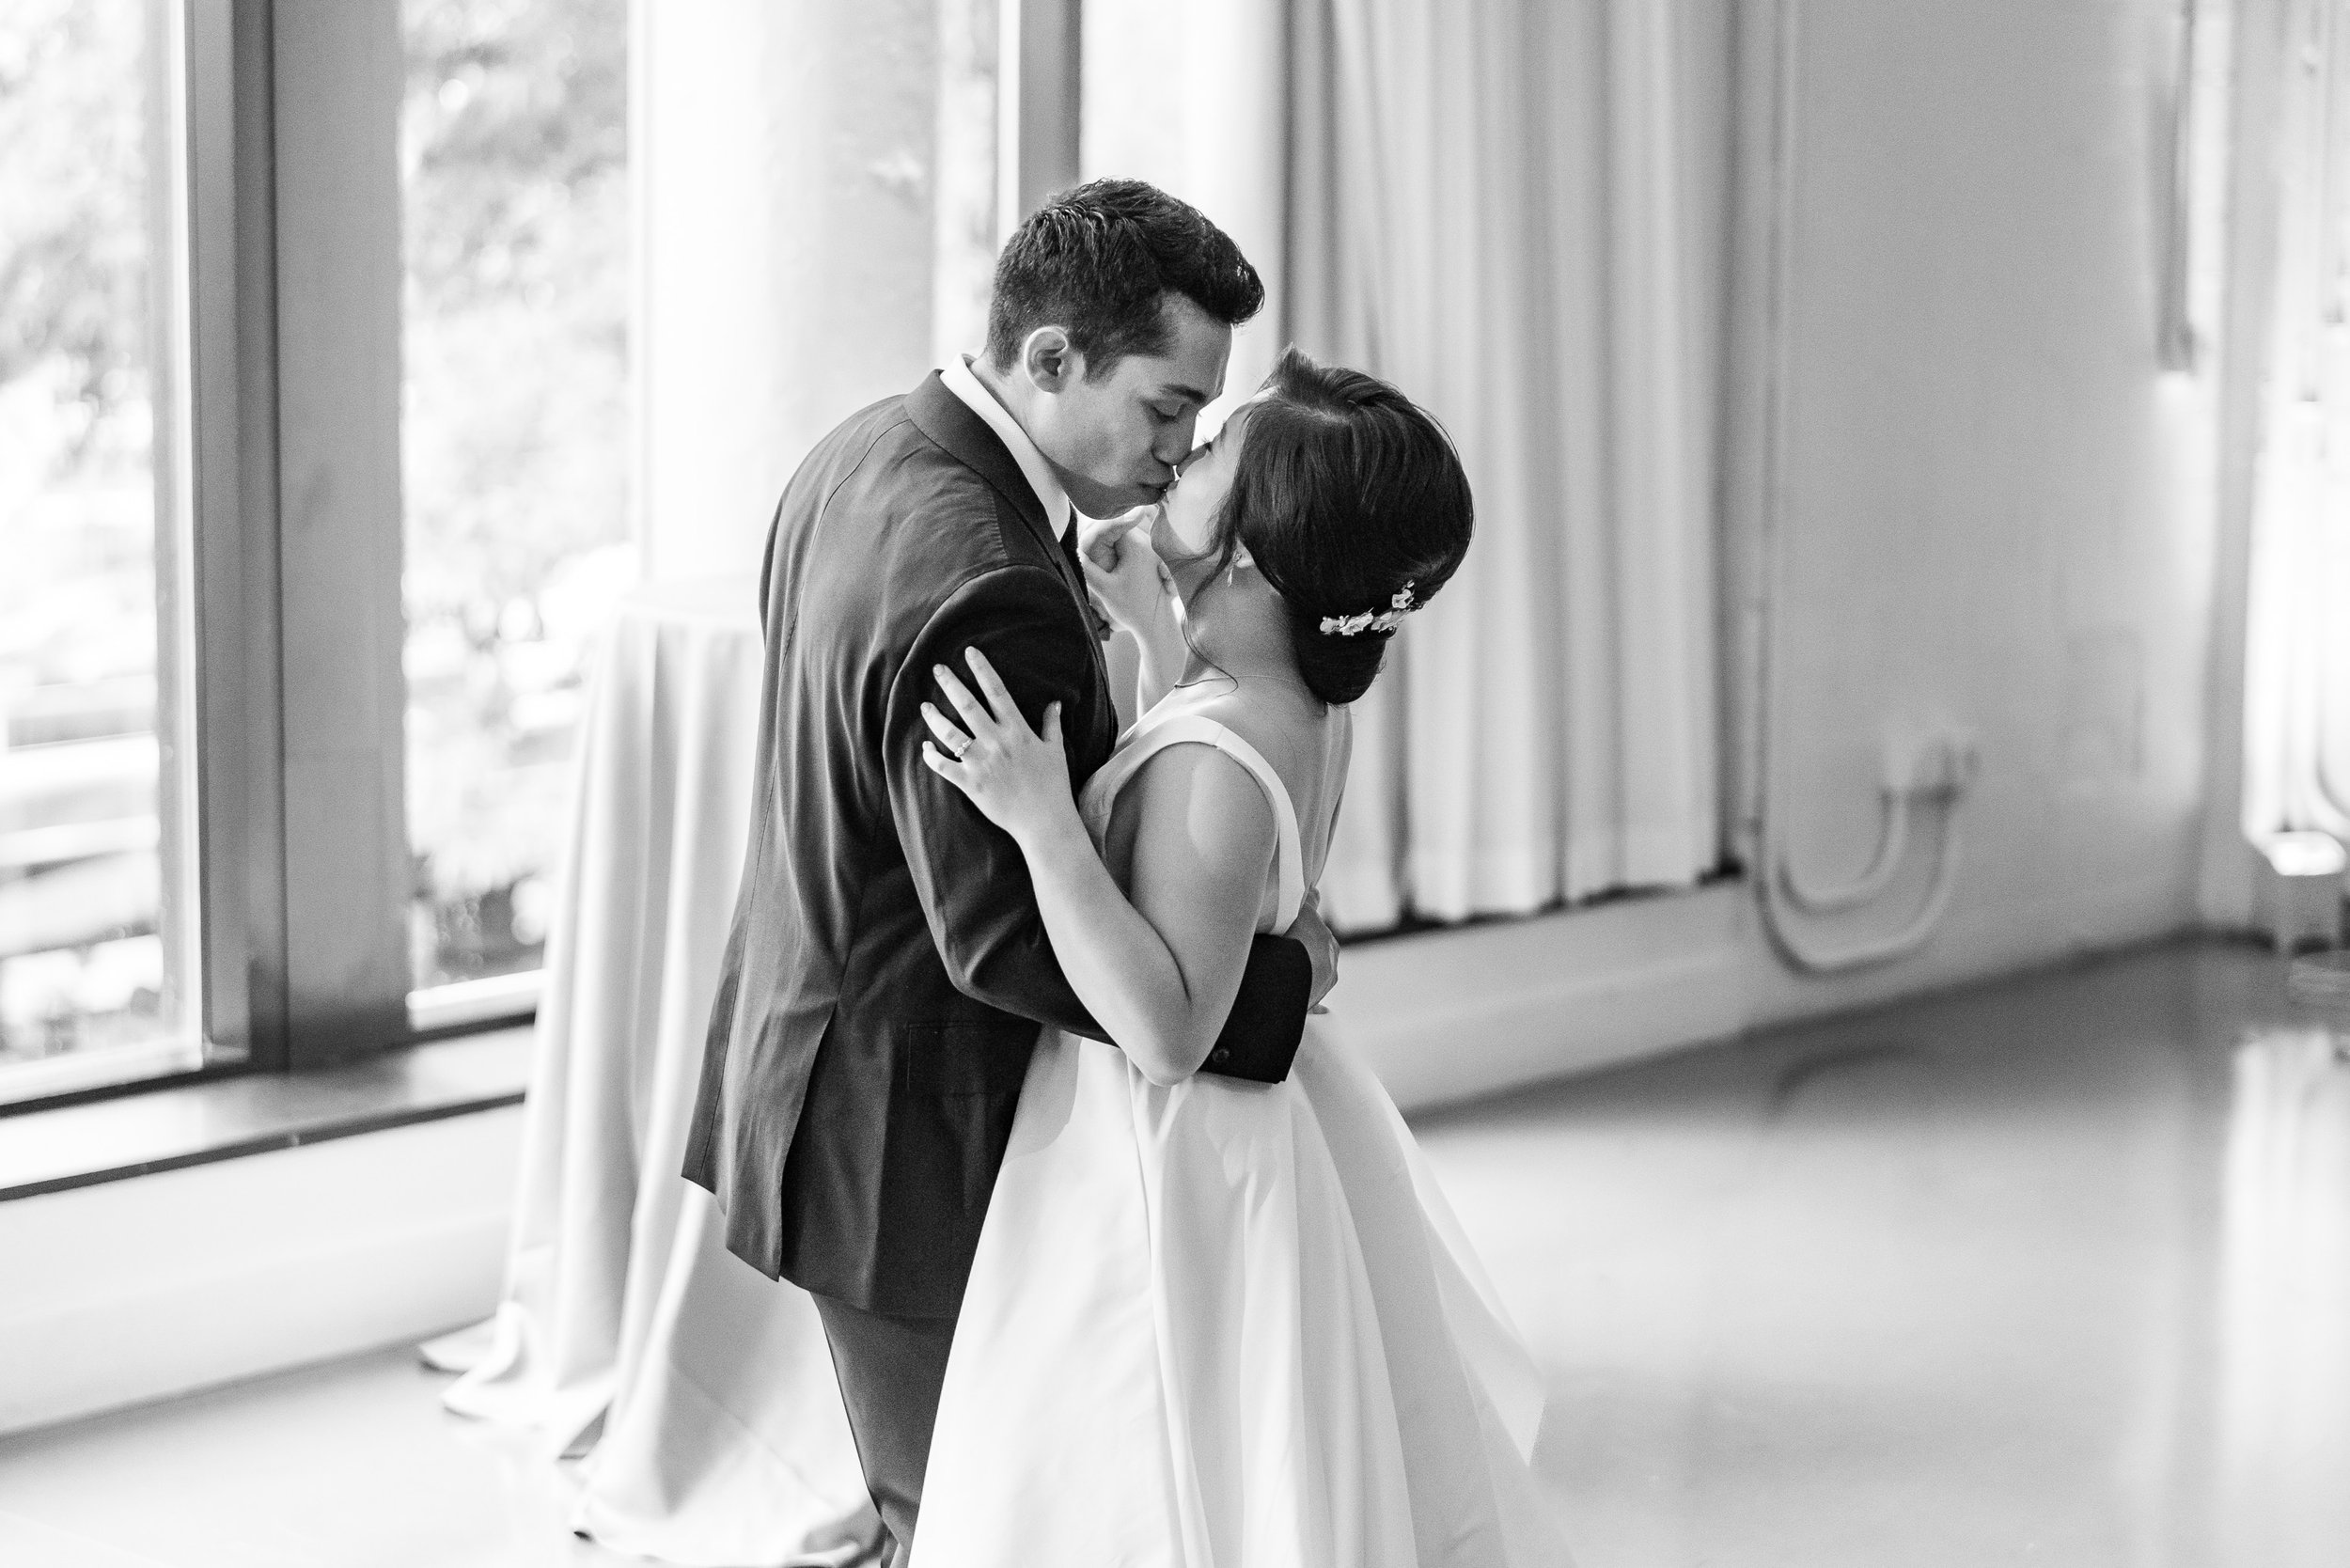 Bride and groom kiss during first dance on their wedding day